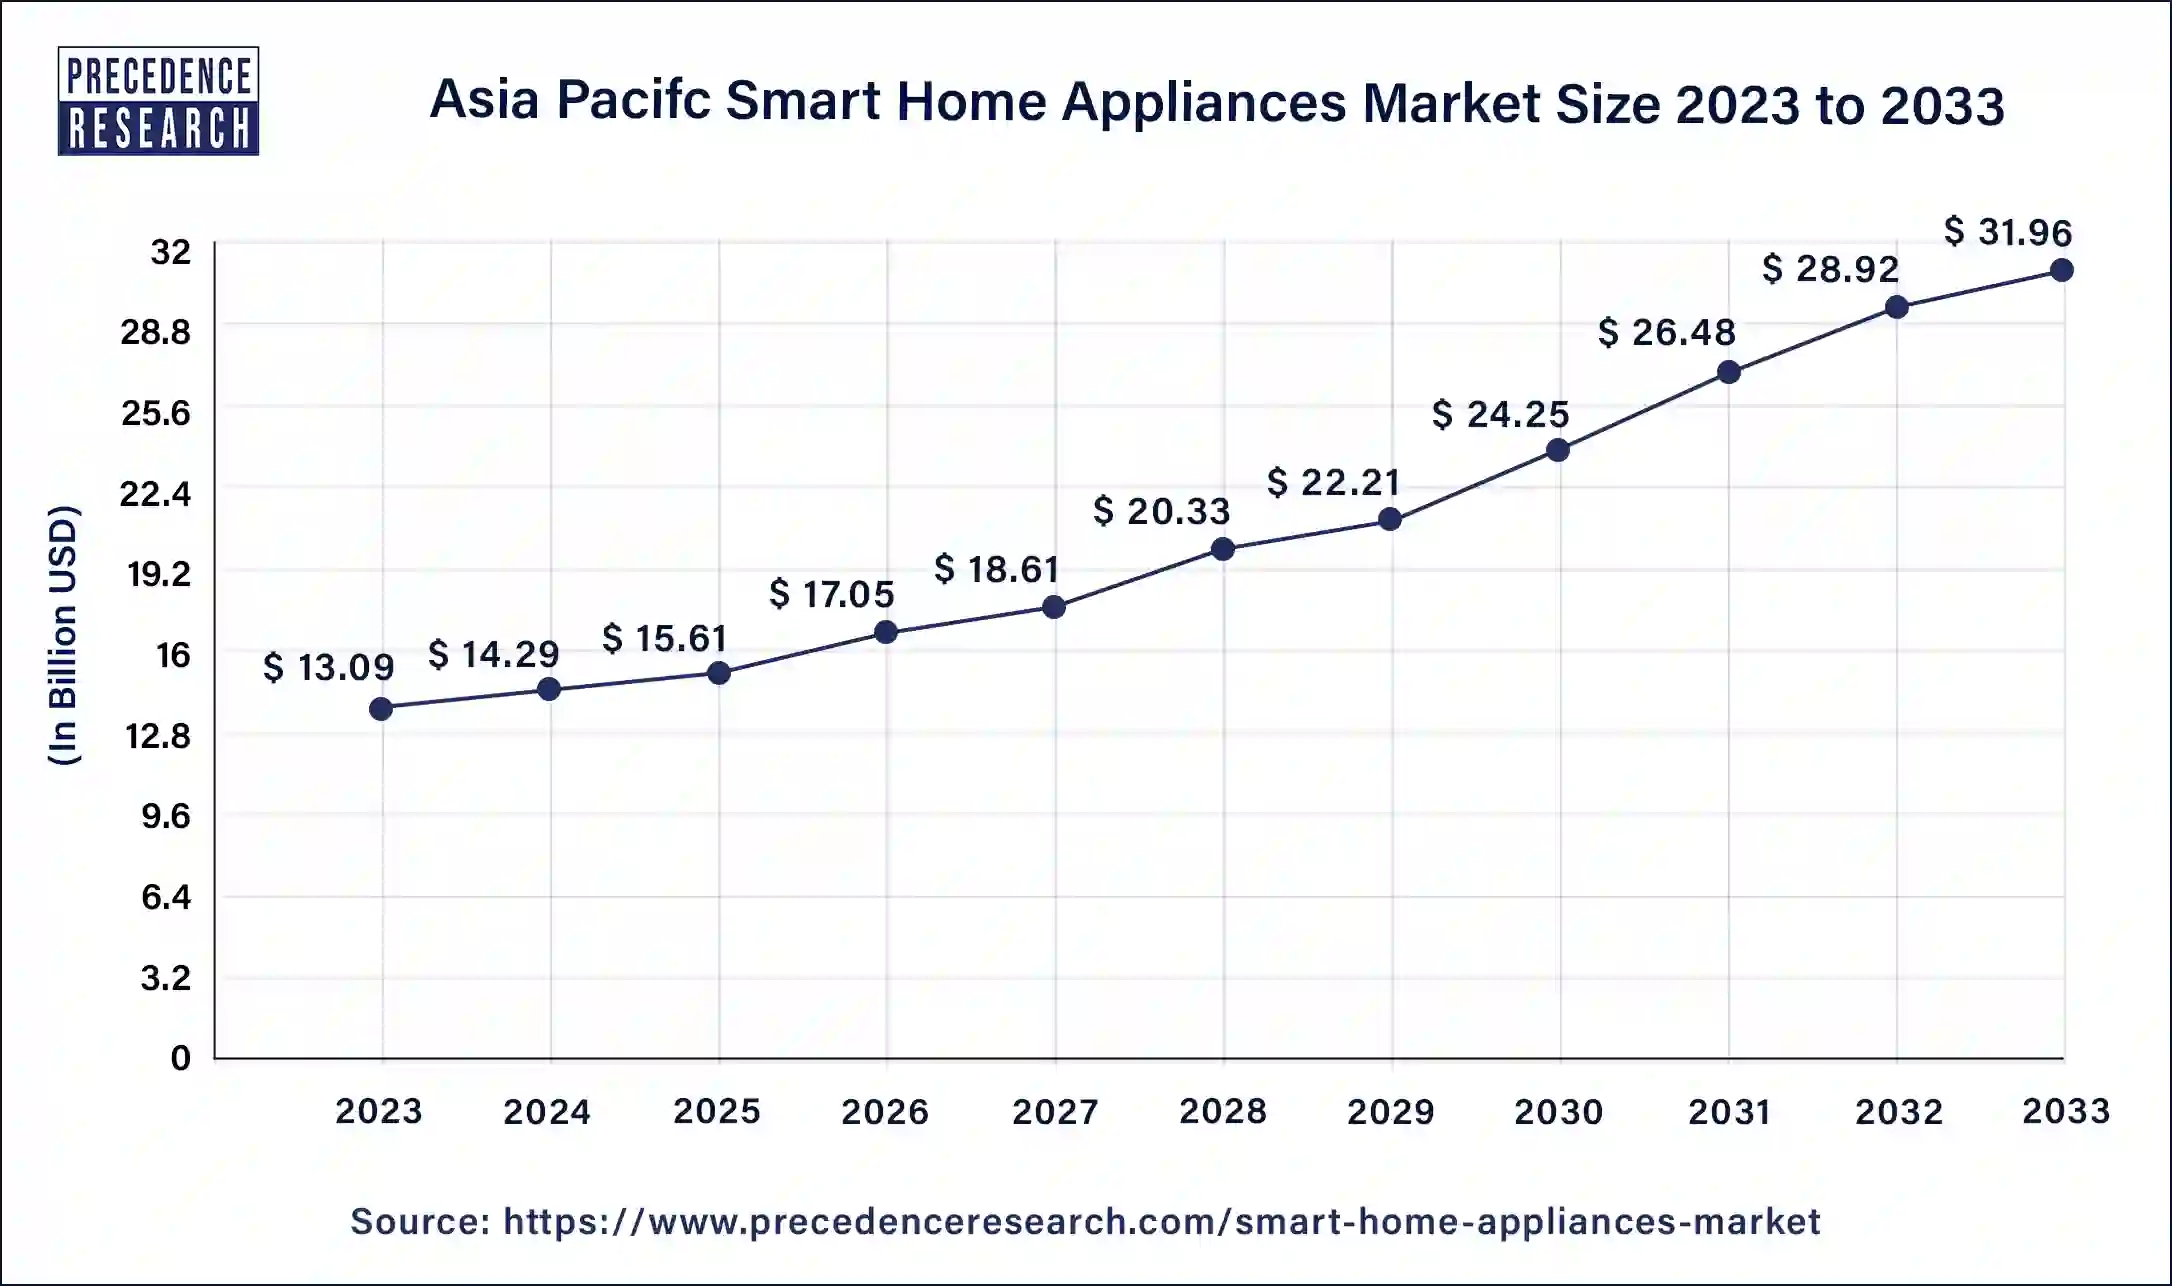 Asia Pacific Smart Home Appliances Market Size 2024 to 2033